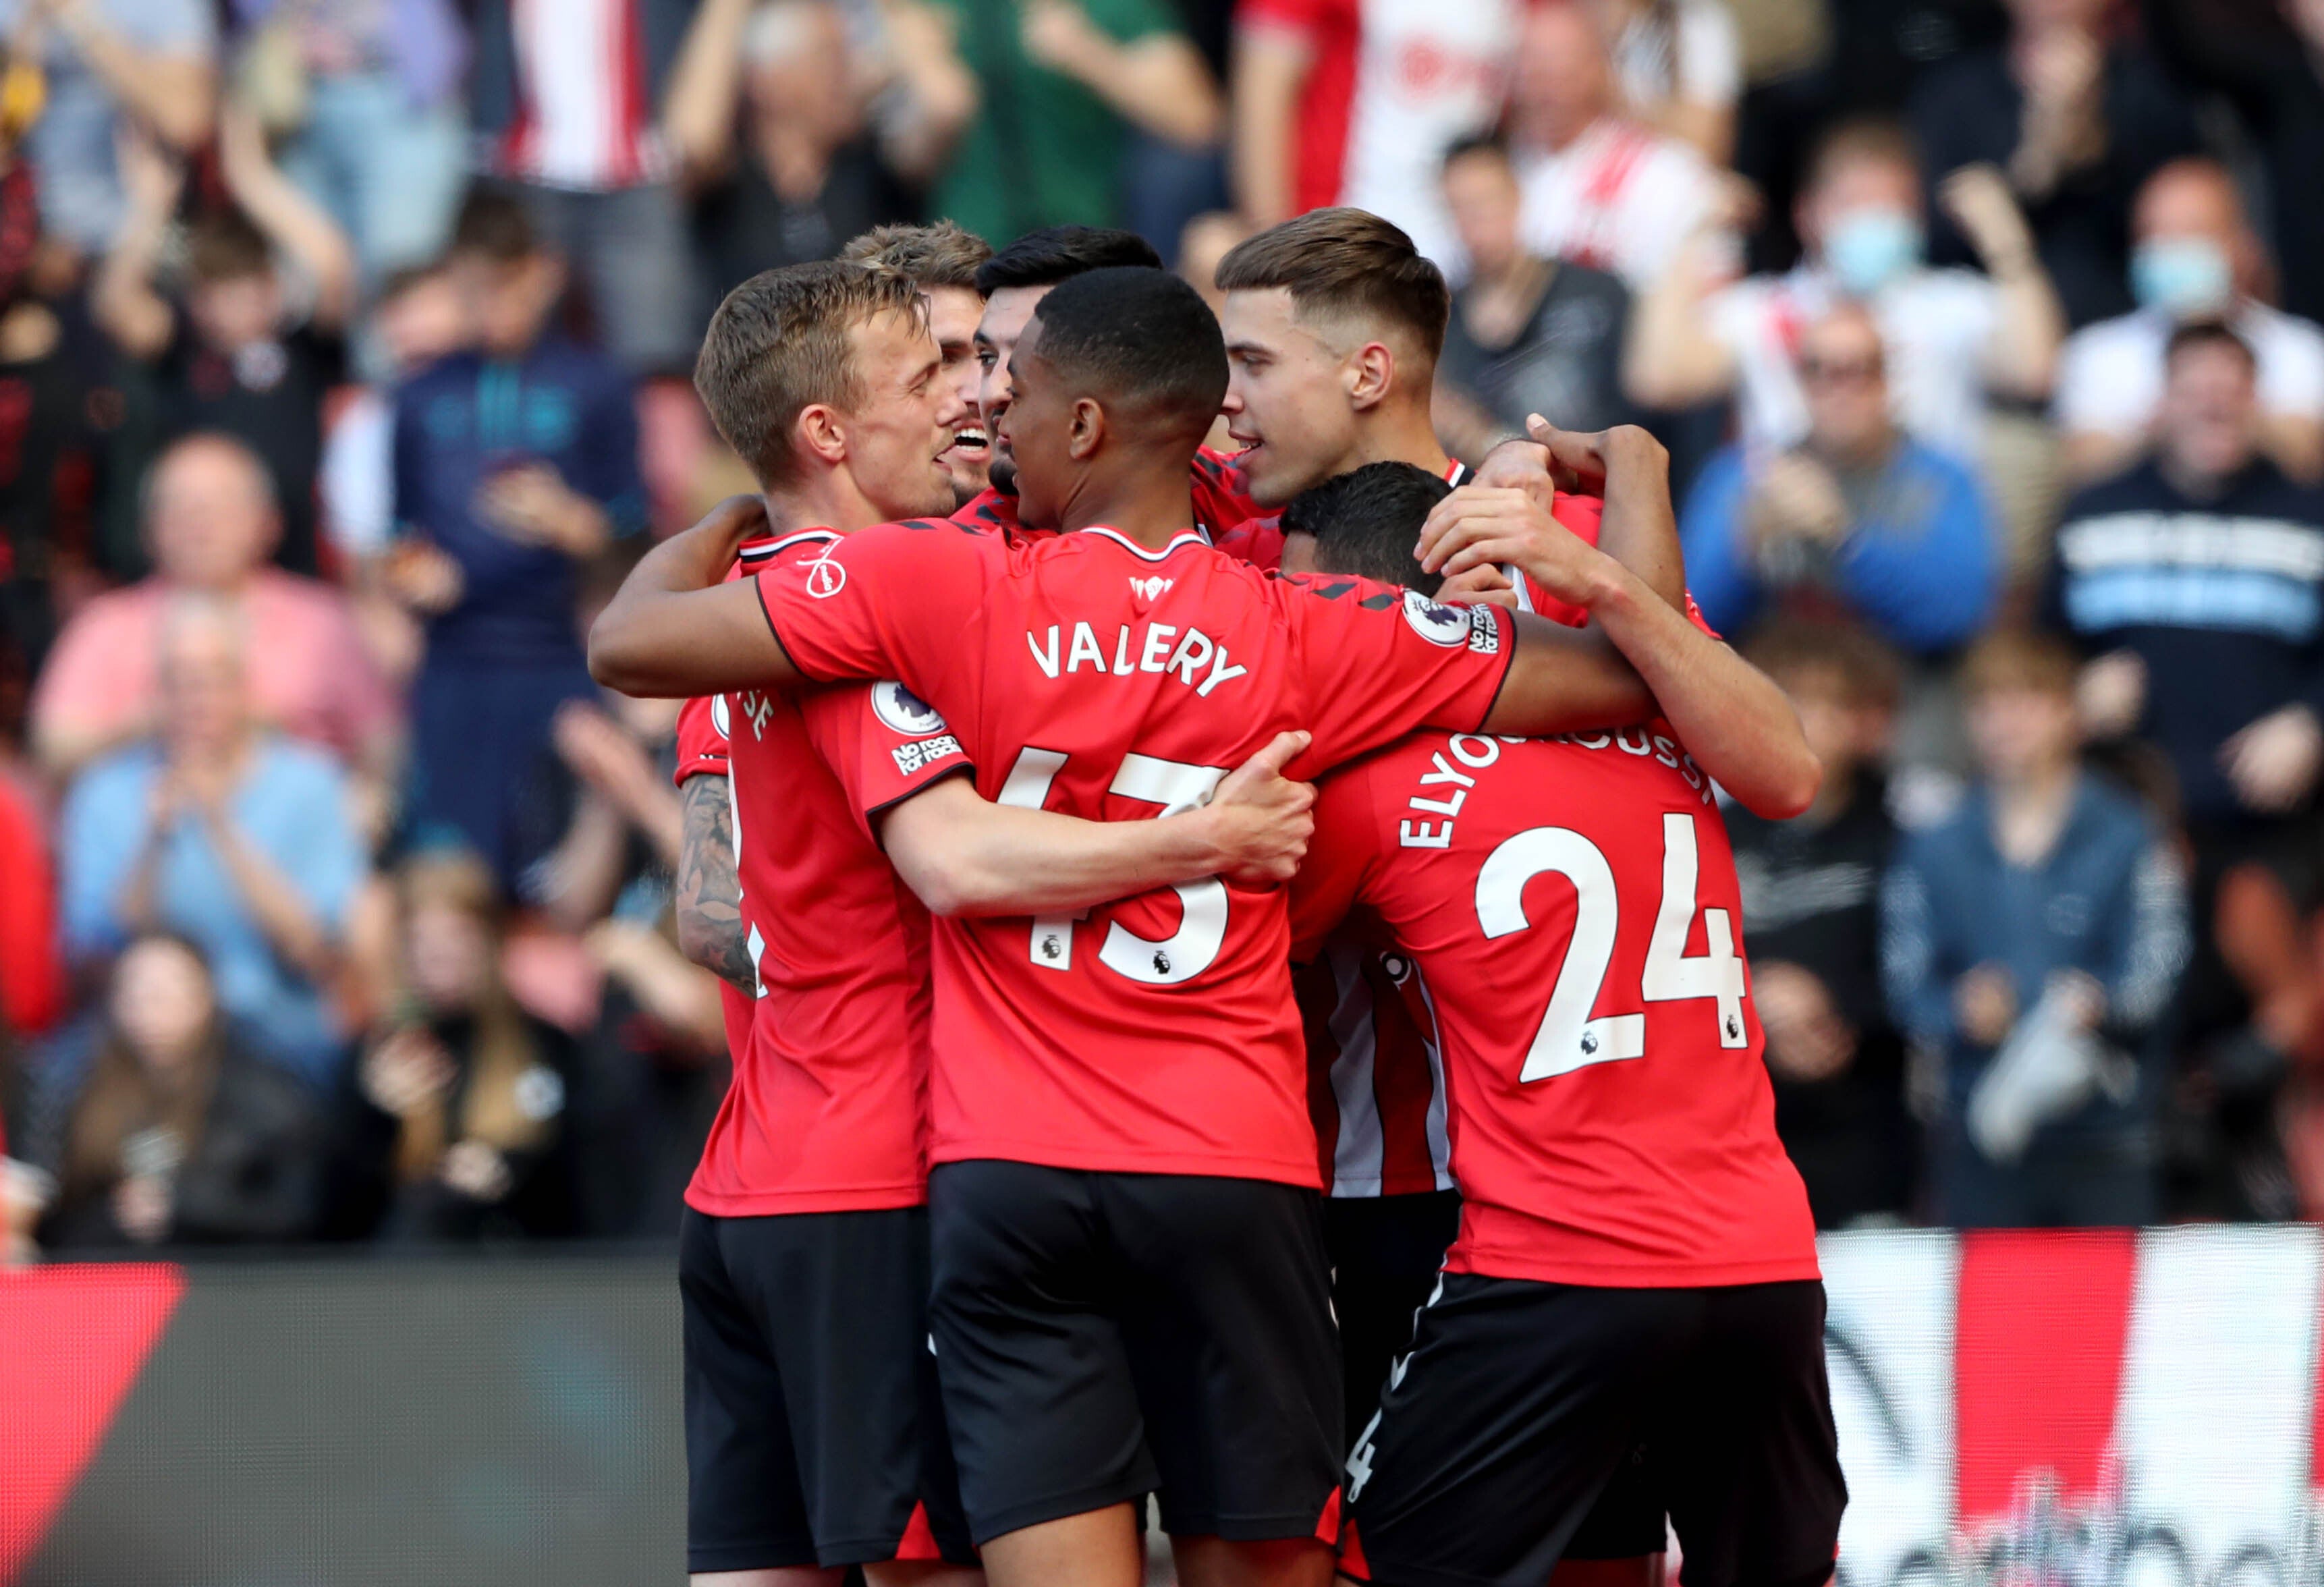 Goalscorer Jan Bednarek (second right) is congratulated by his Southampton teammates